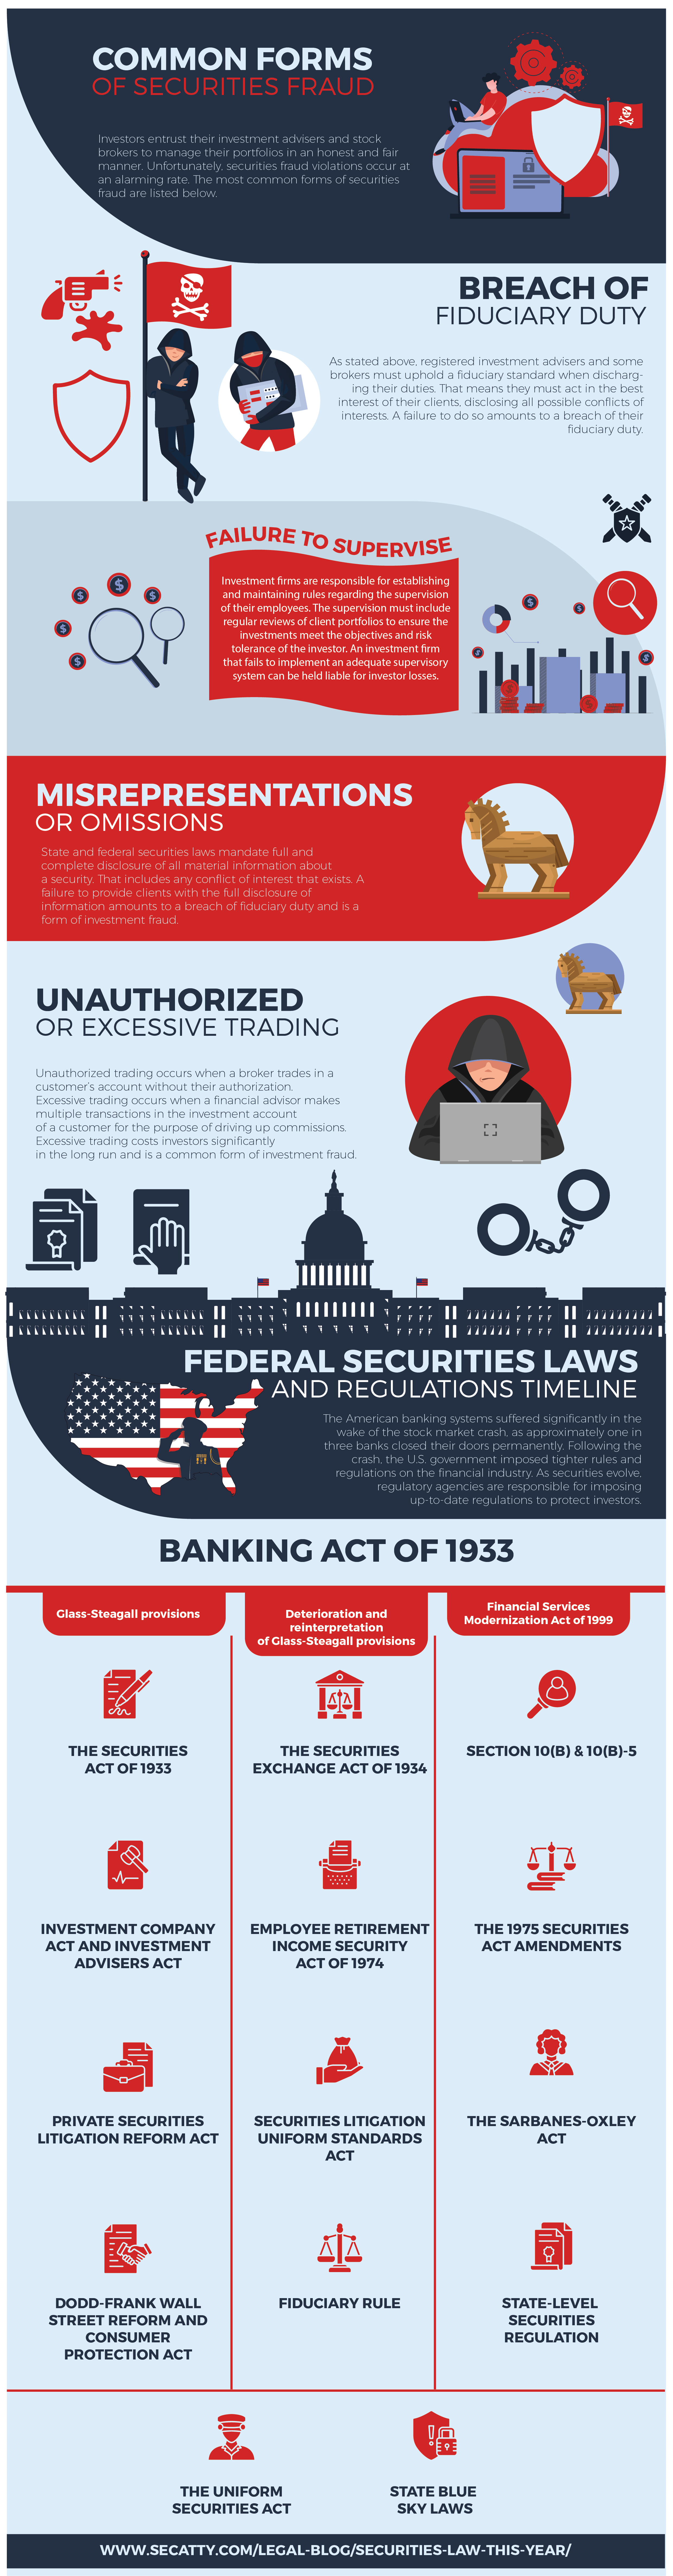 Common Forms of Securities Fraud Infographic